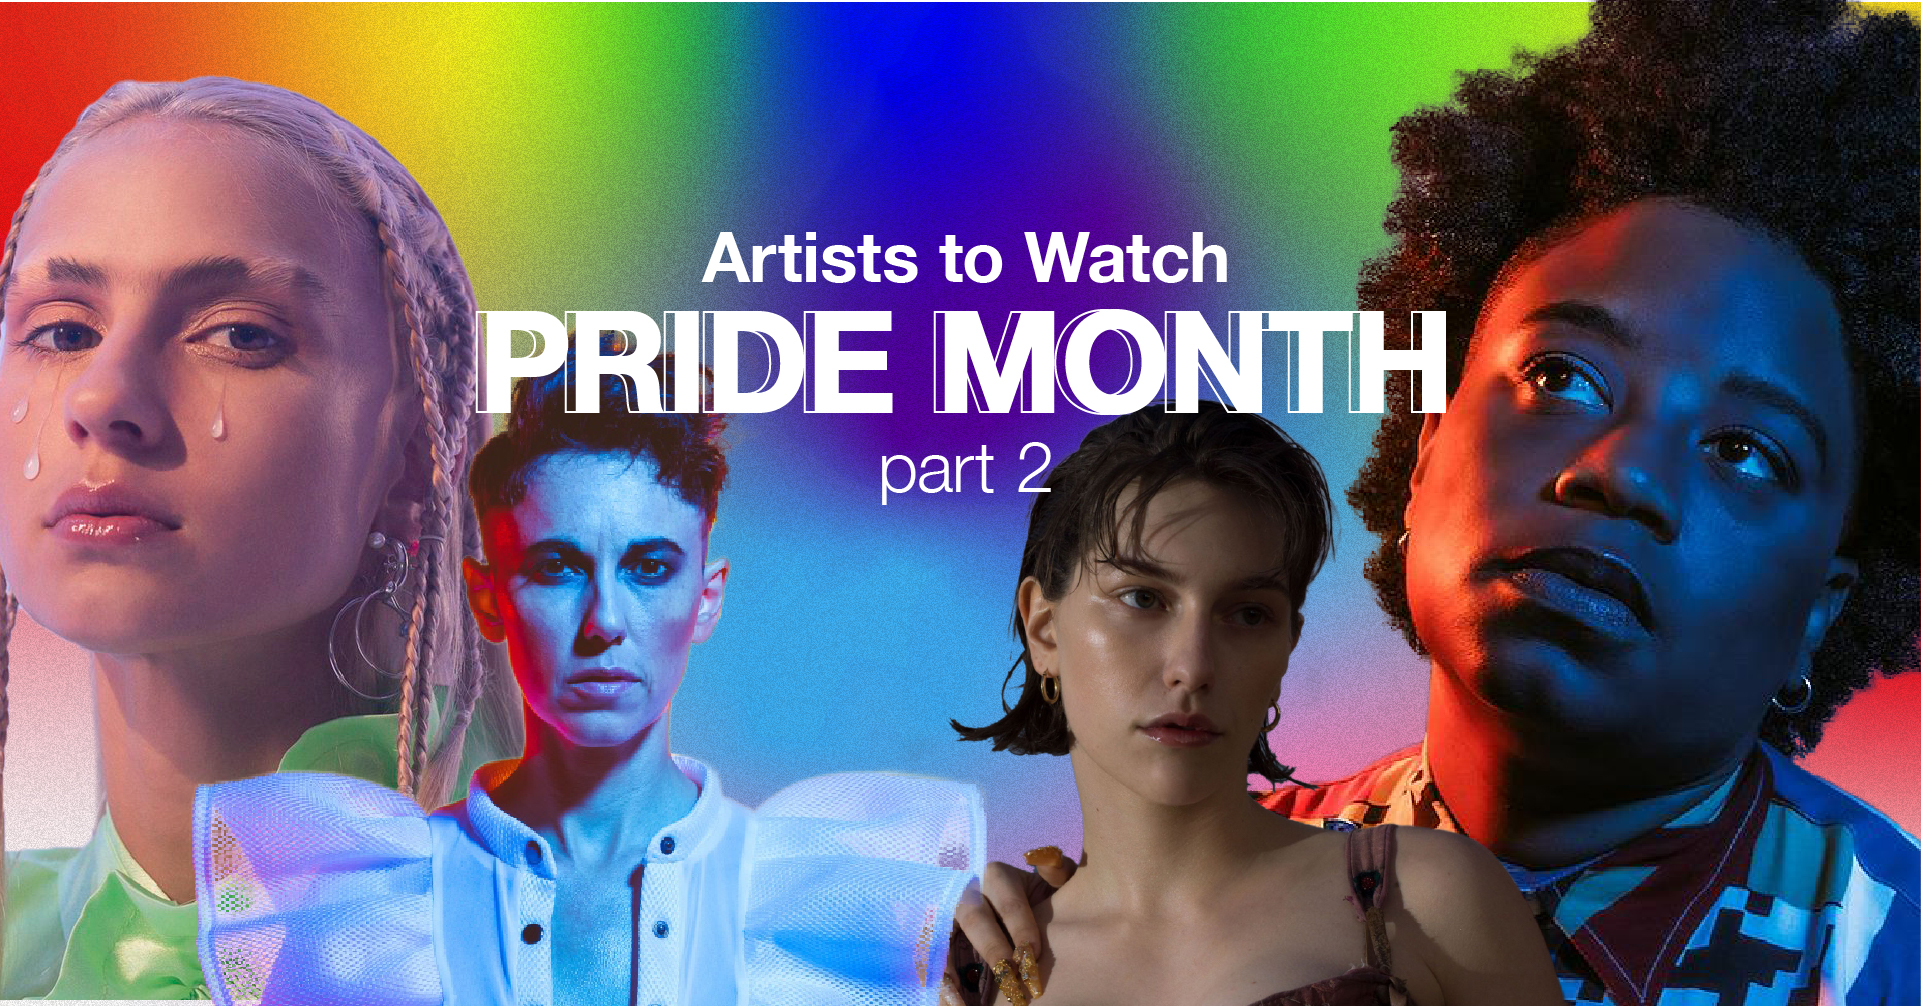 🏳️‍🌈 Artists to Watch: Pride Month - Part 2